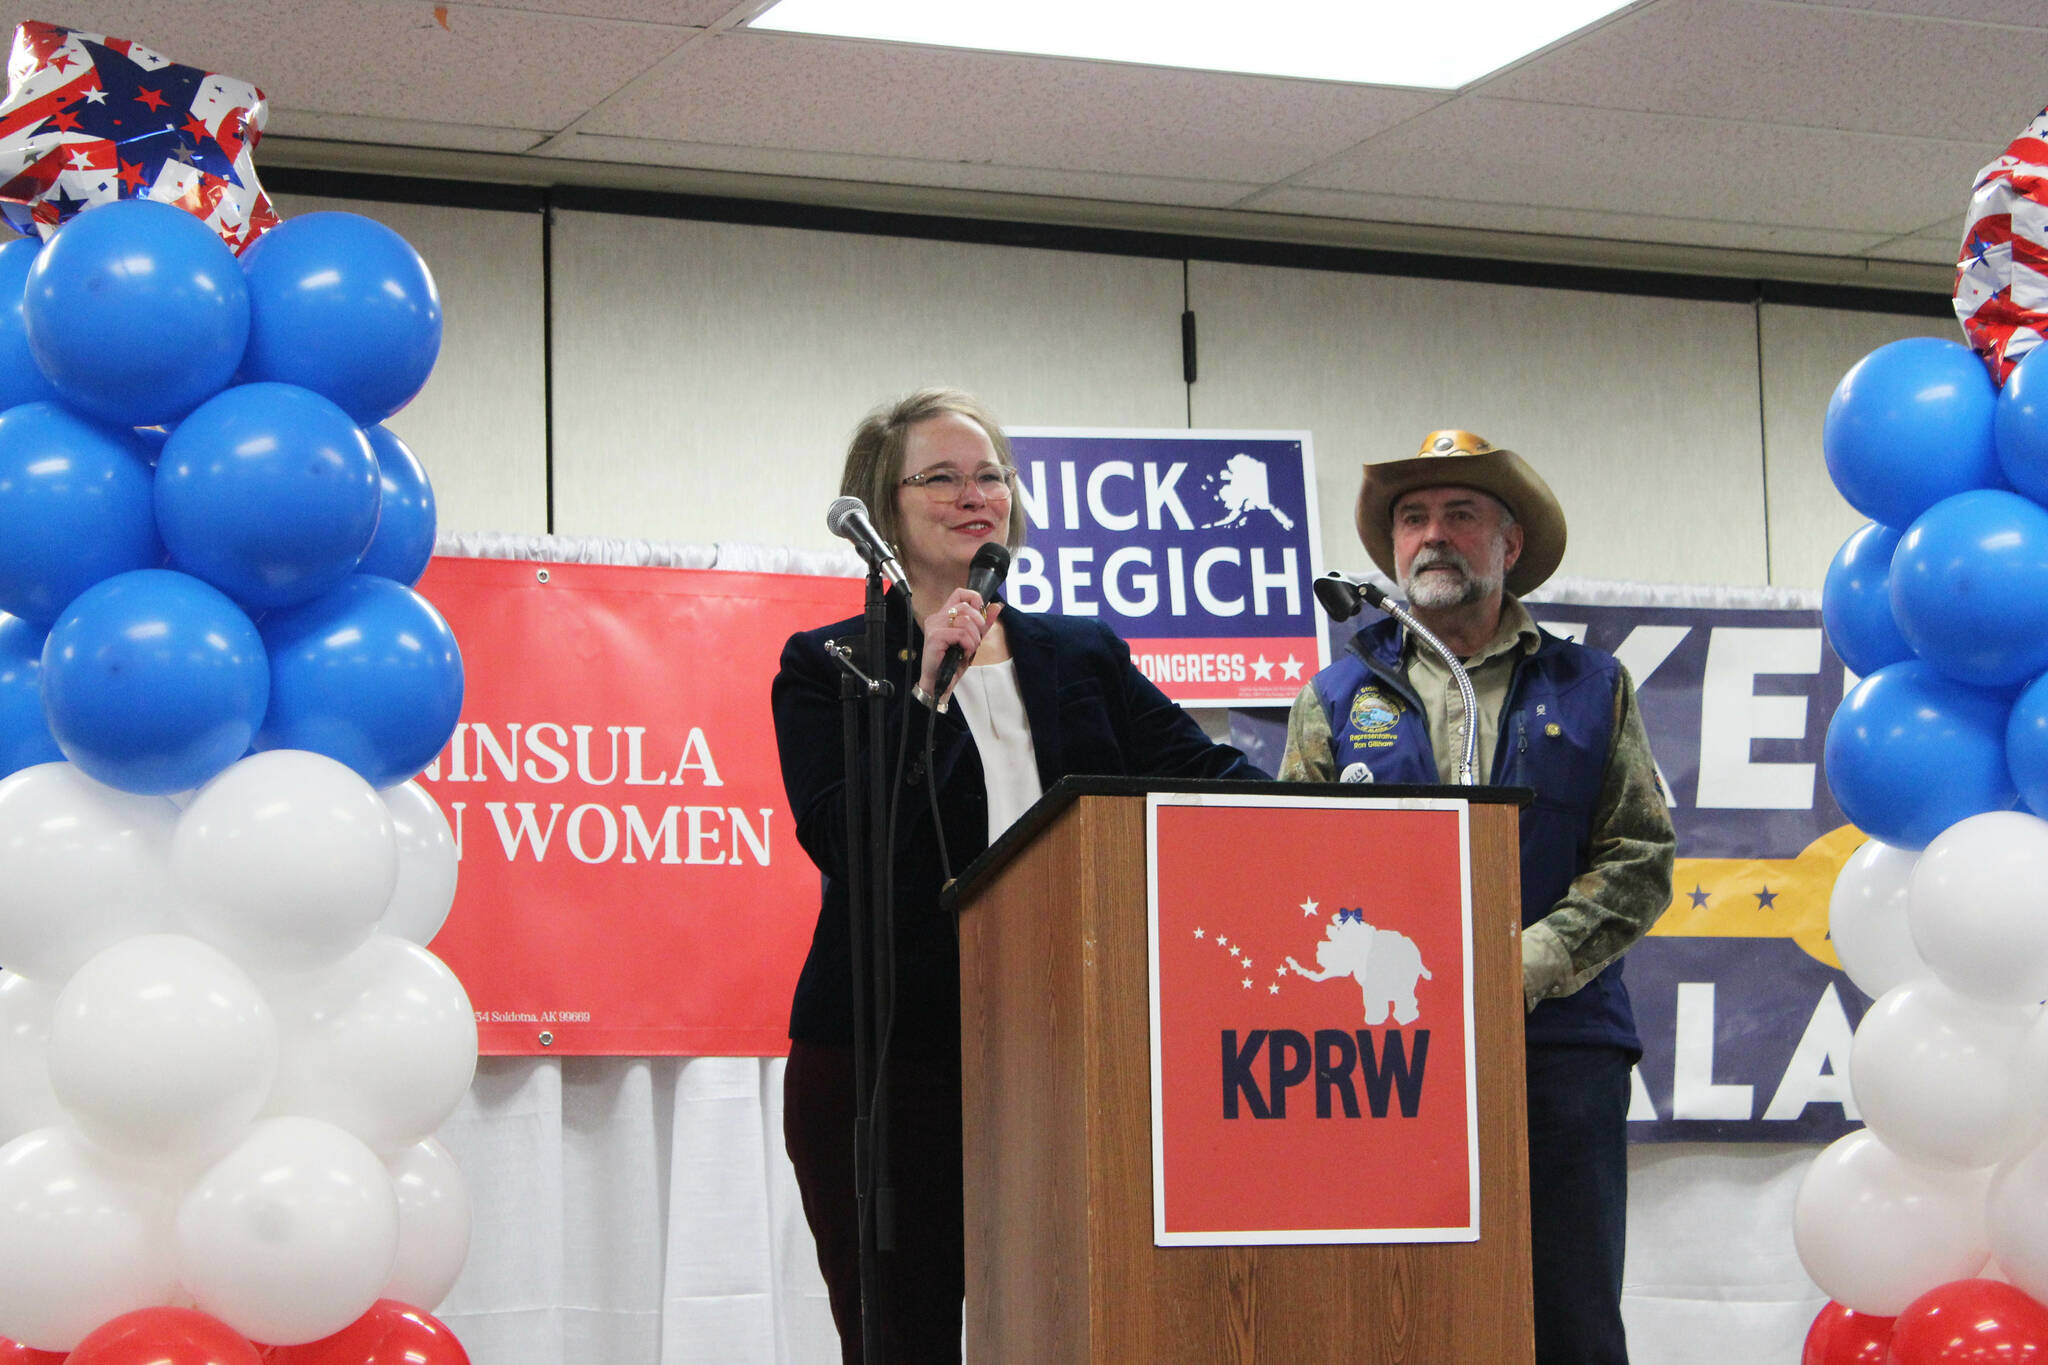 Rep. Sarah Vance speaks at a “Get Out the Vote” rally hosted by the Kenai Peninsula Republican Women at the Soldotna Regional Sports Complex on Tuesday, Oct. 18, 2022, in Soldotna, Alaska. (Ashlyn O’Hara/Peninsula Clarion)